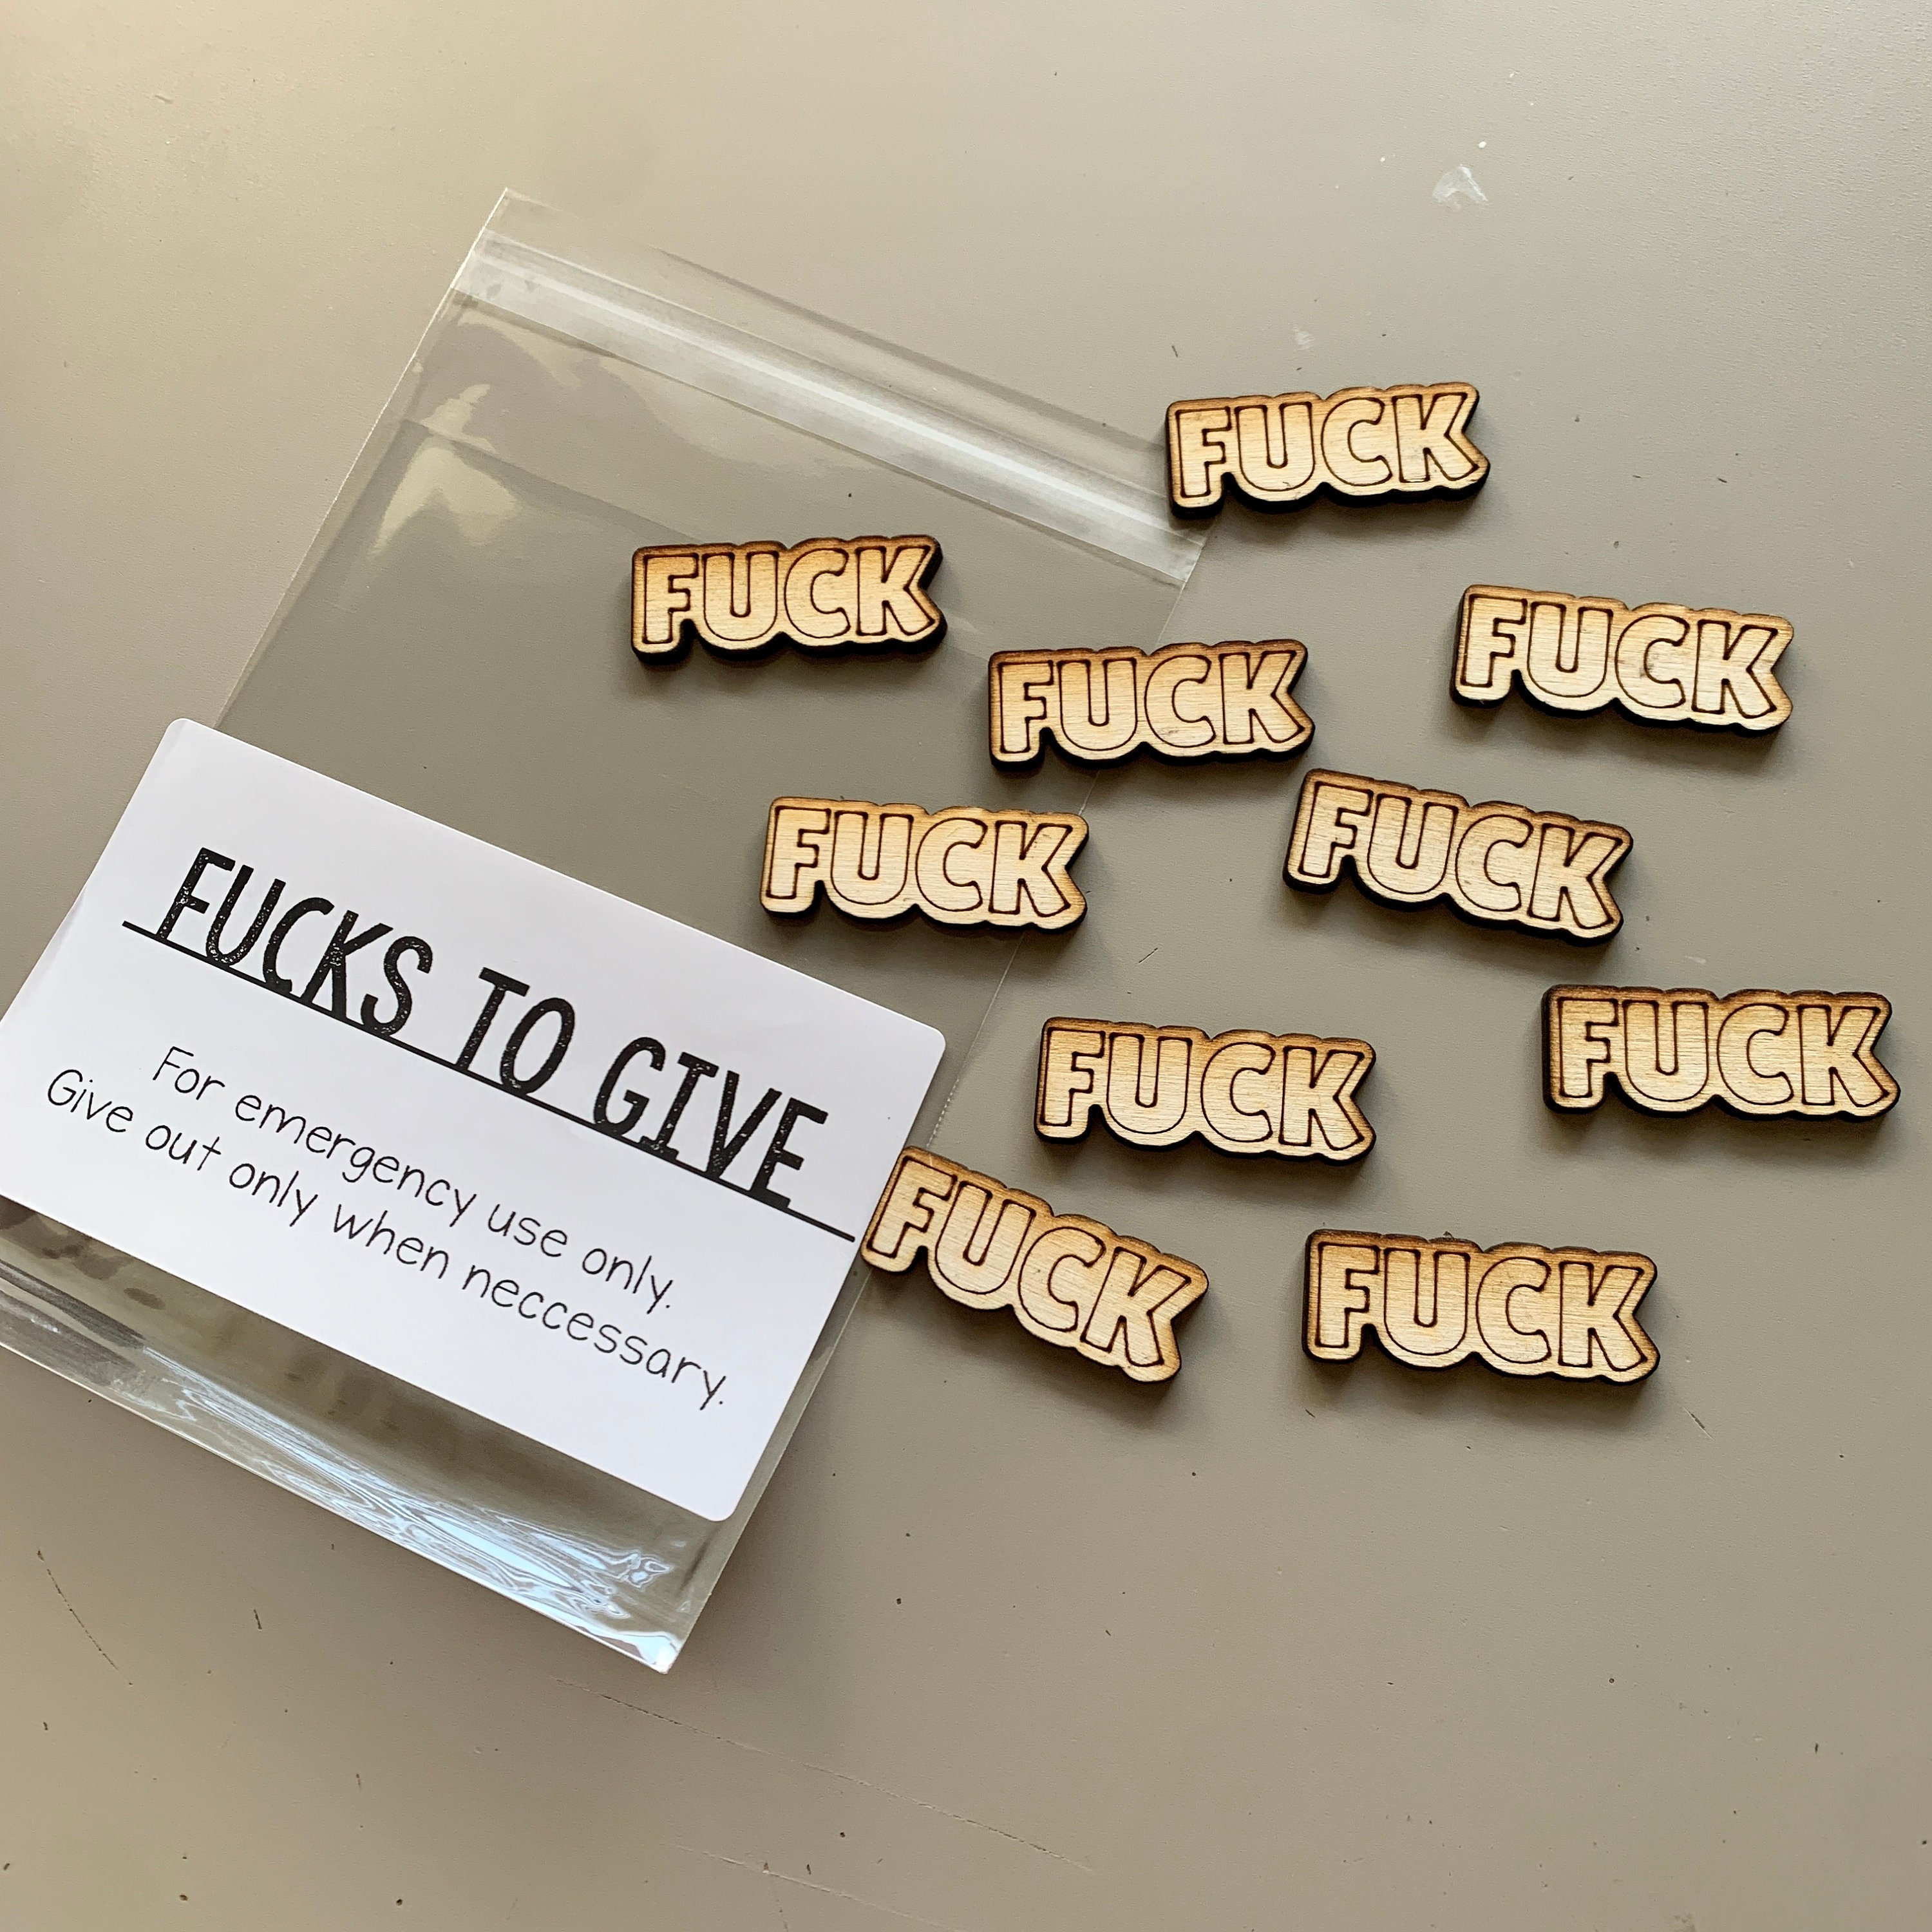 Bag of Fucks fucks to Give My Last Fuck When You Run Out of Fucks